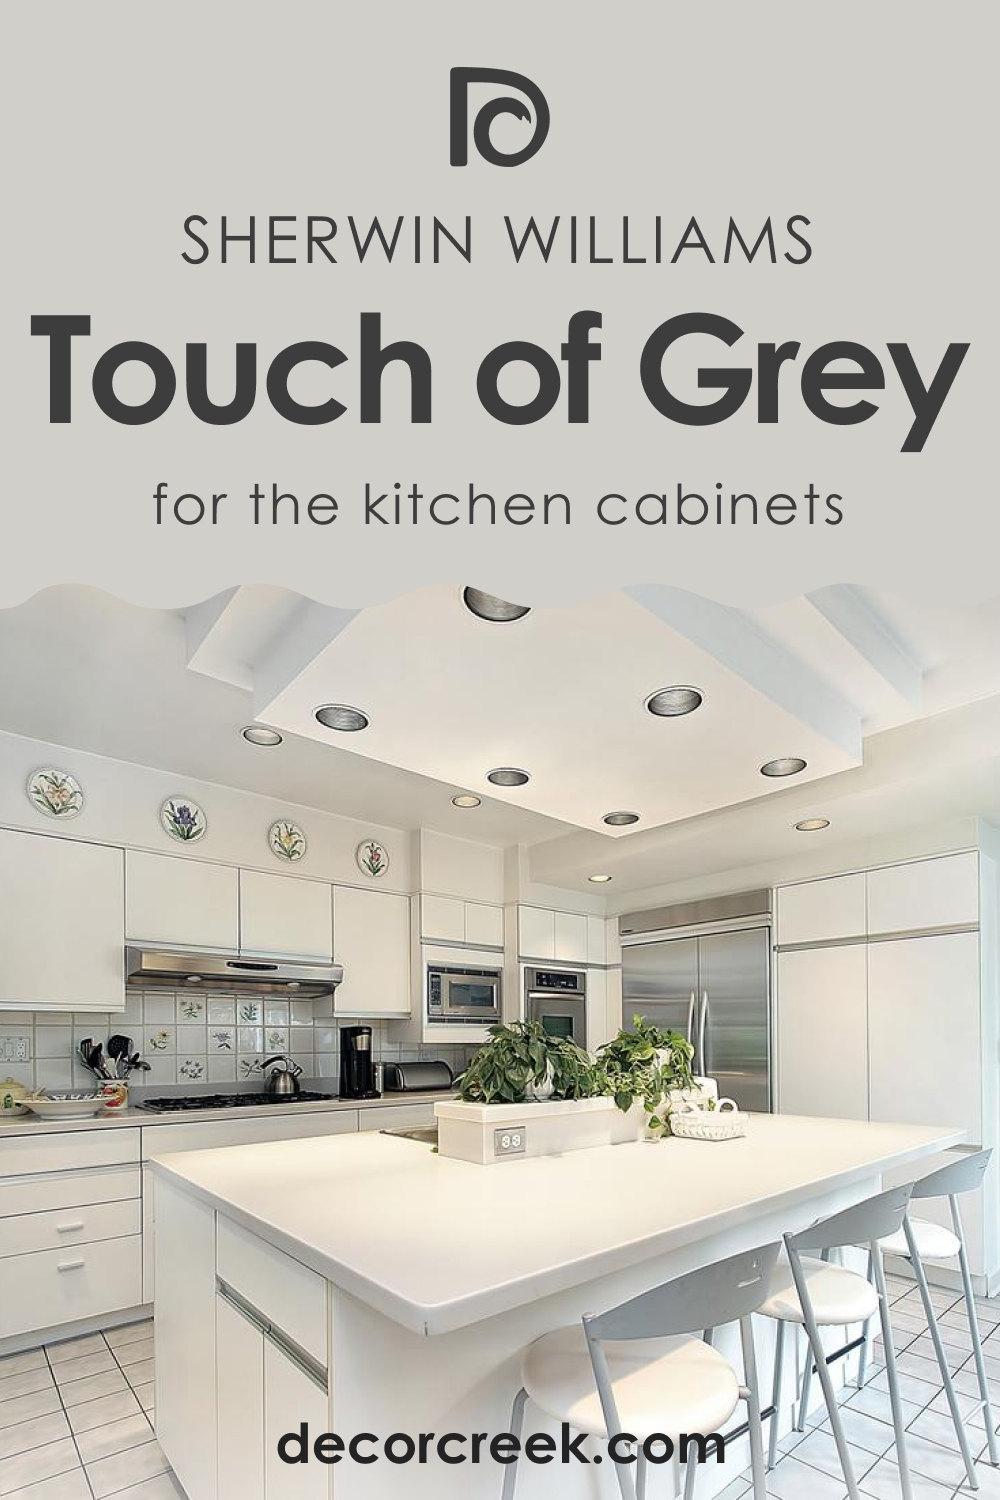 How to Use SW 9549 Touch of Grey for the Kitchen Cabinets?